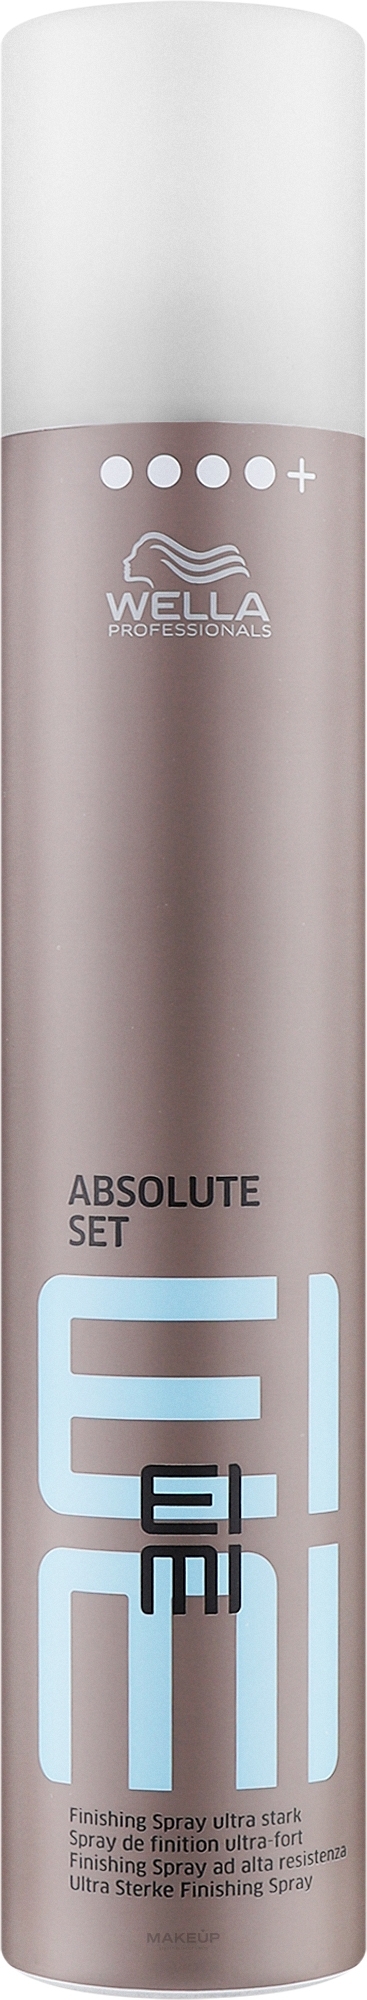 Ultra Strong Hold Hair Spray - Wella Professionals EIMI Fixing Absolute Set — photo 300 ml